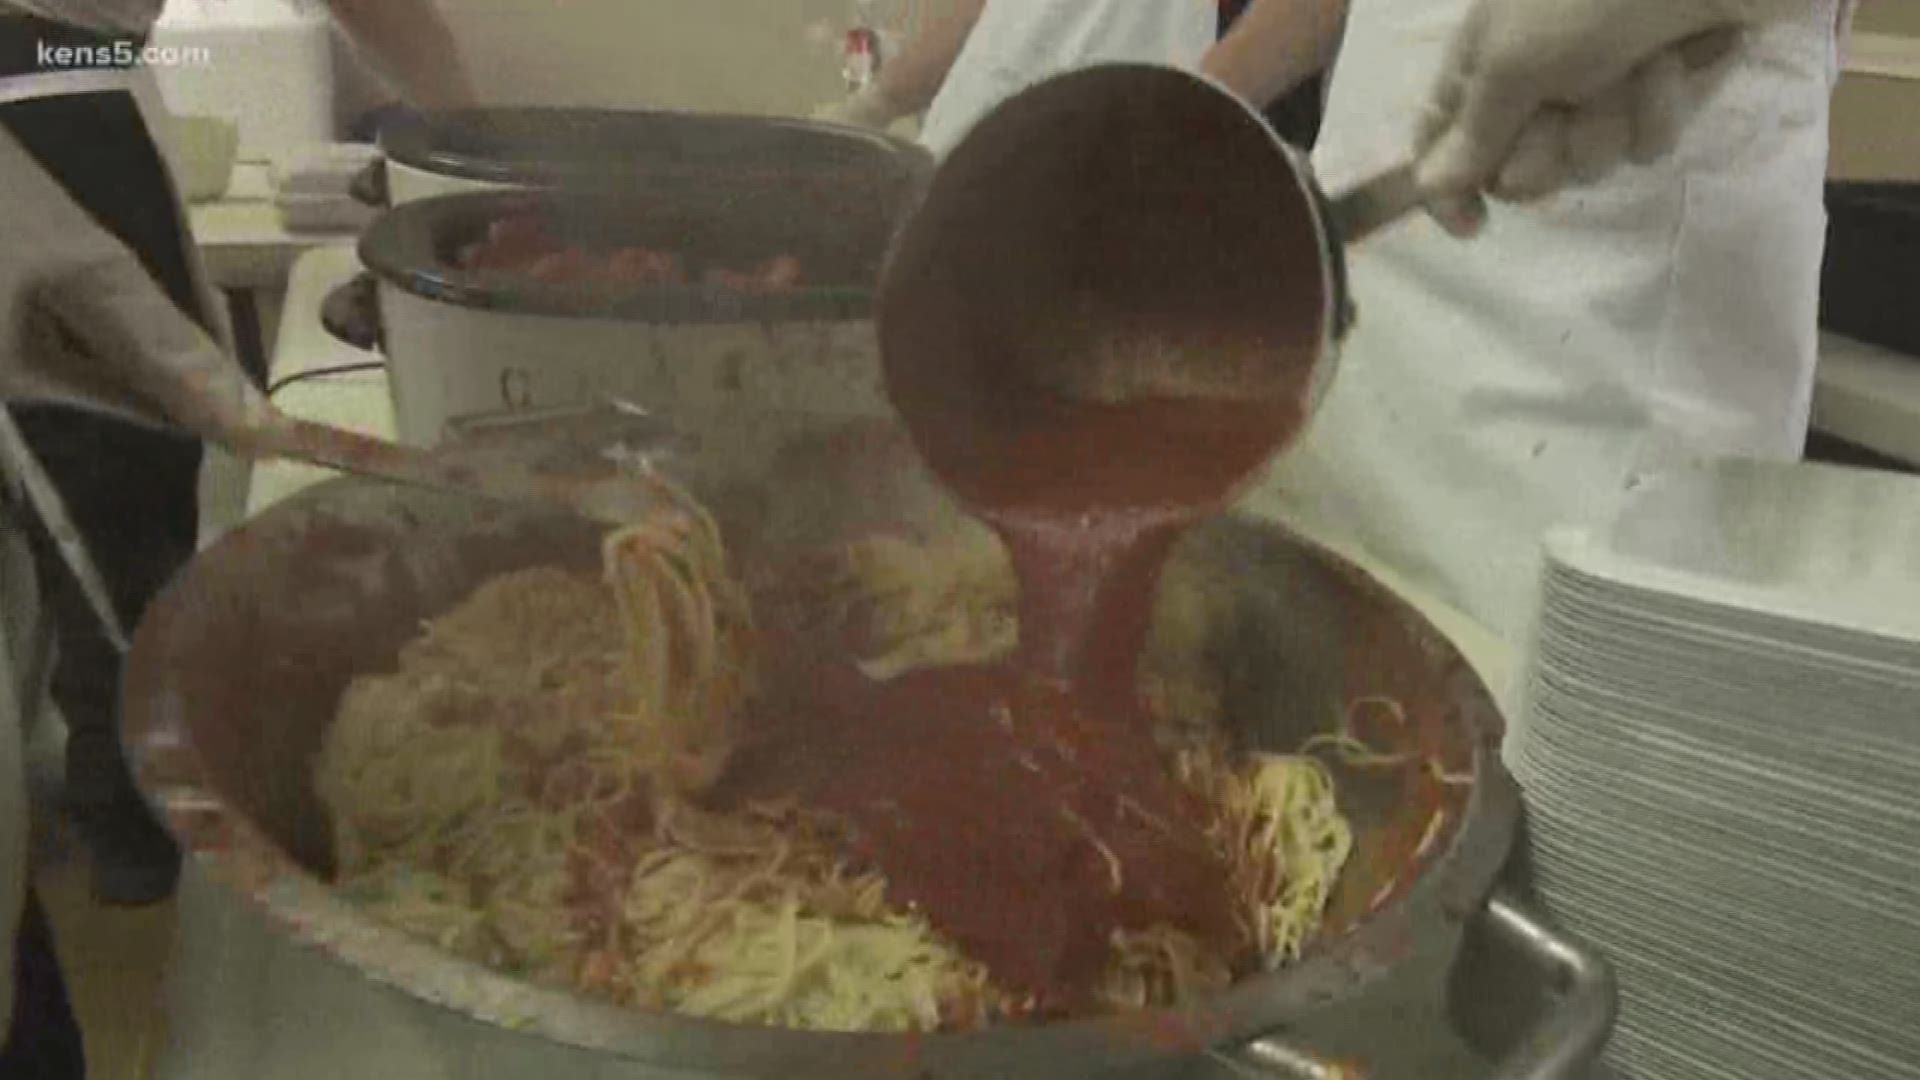 The 100 Club of San Antonio's spaghetti dinner has become a staple here in the Alamo City. The best part -- not just the delicious food -- but the fact that it benefits the families of fallen first responders killed in the line of duty. Video journalist A